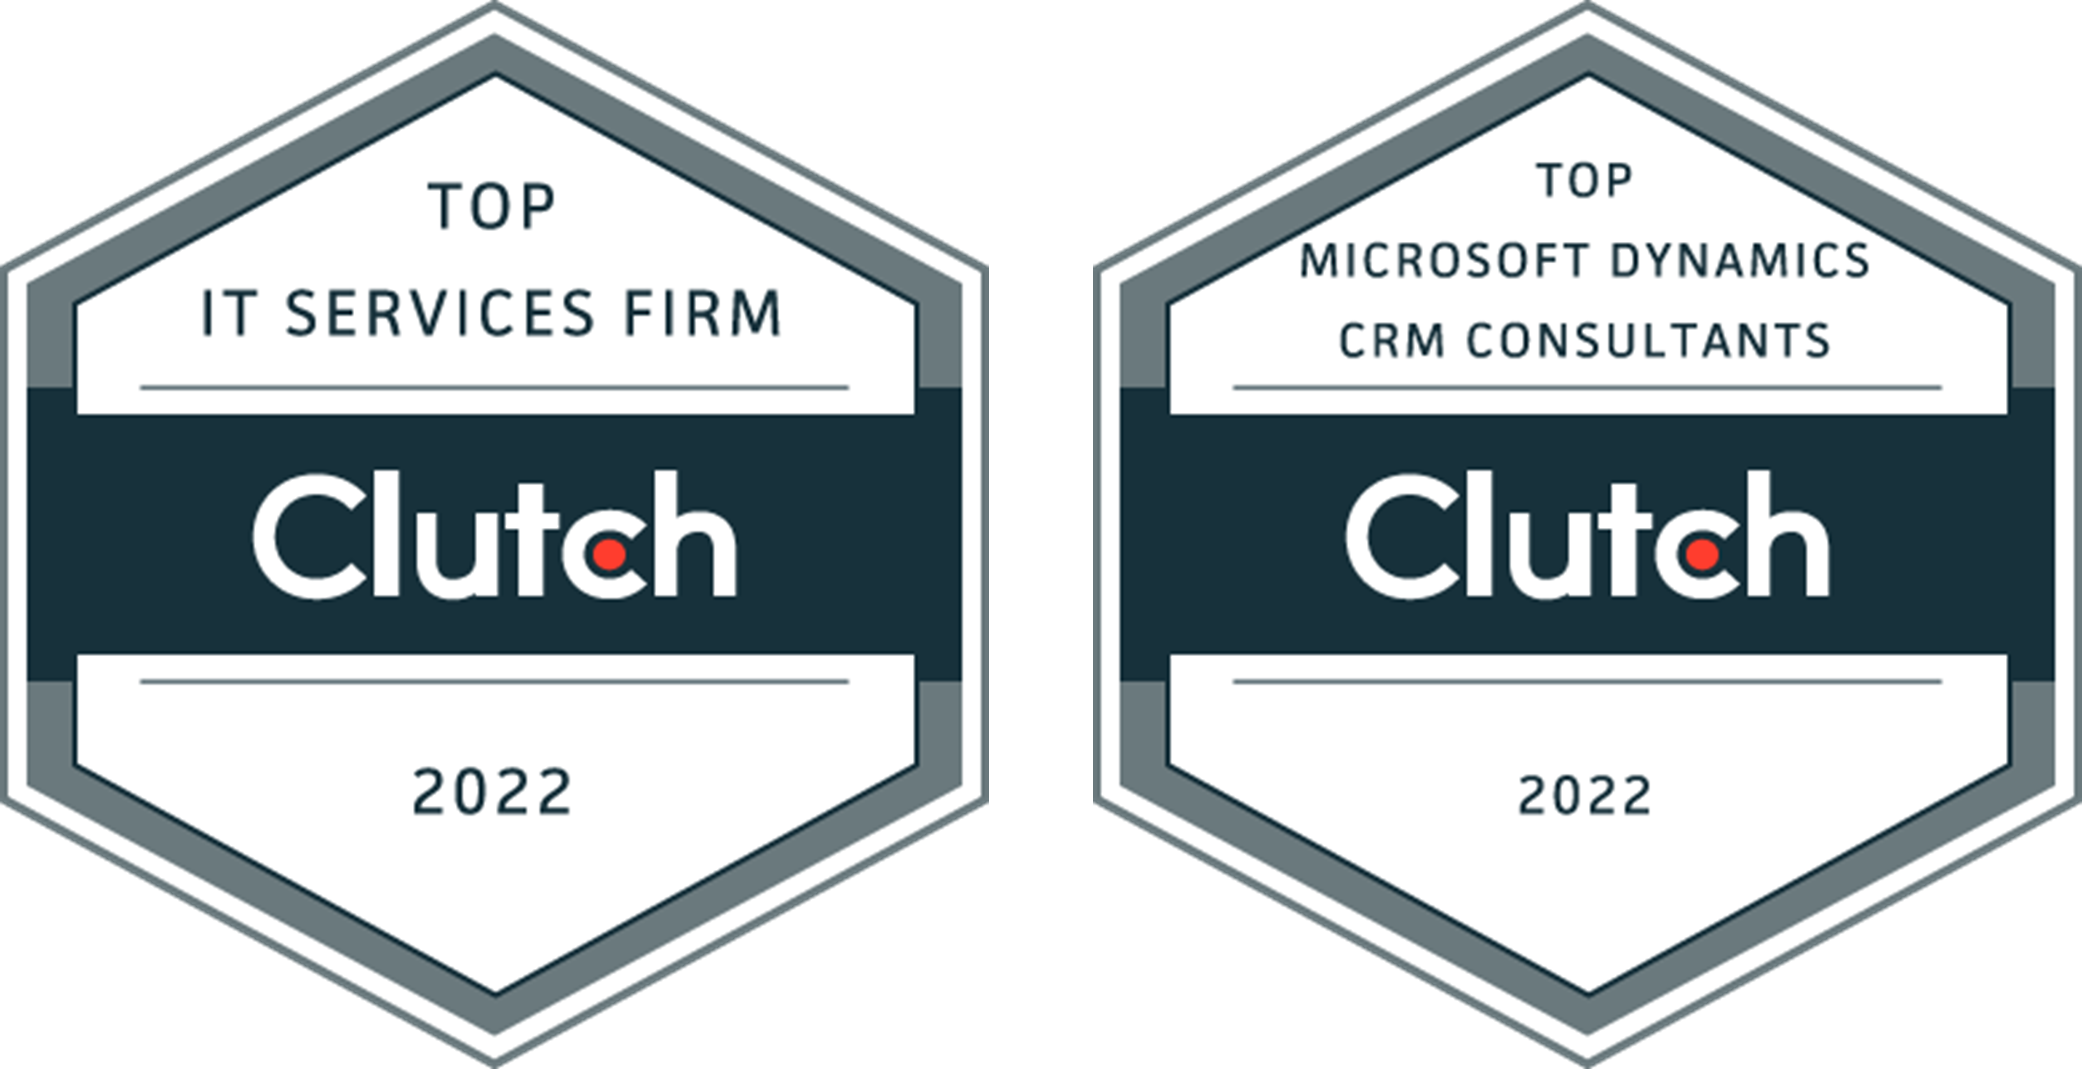 2022-top-IT-Services-Firm-TMC-Clutch-Award-and CRM